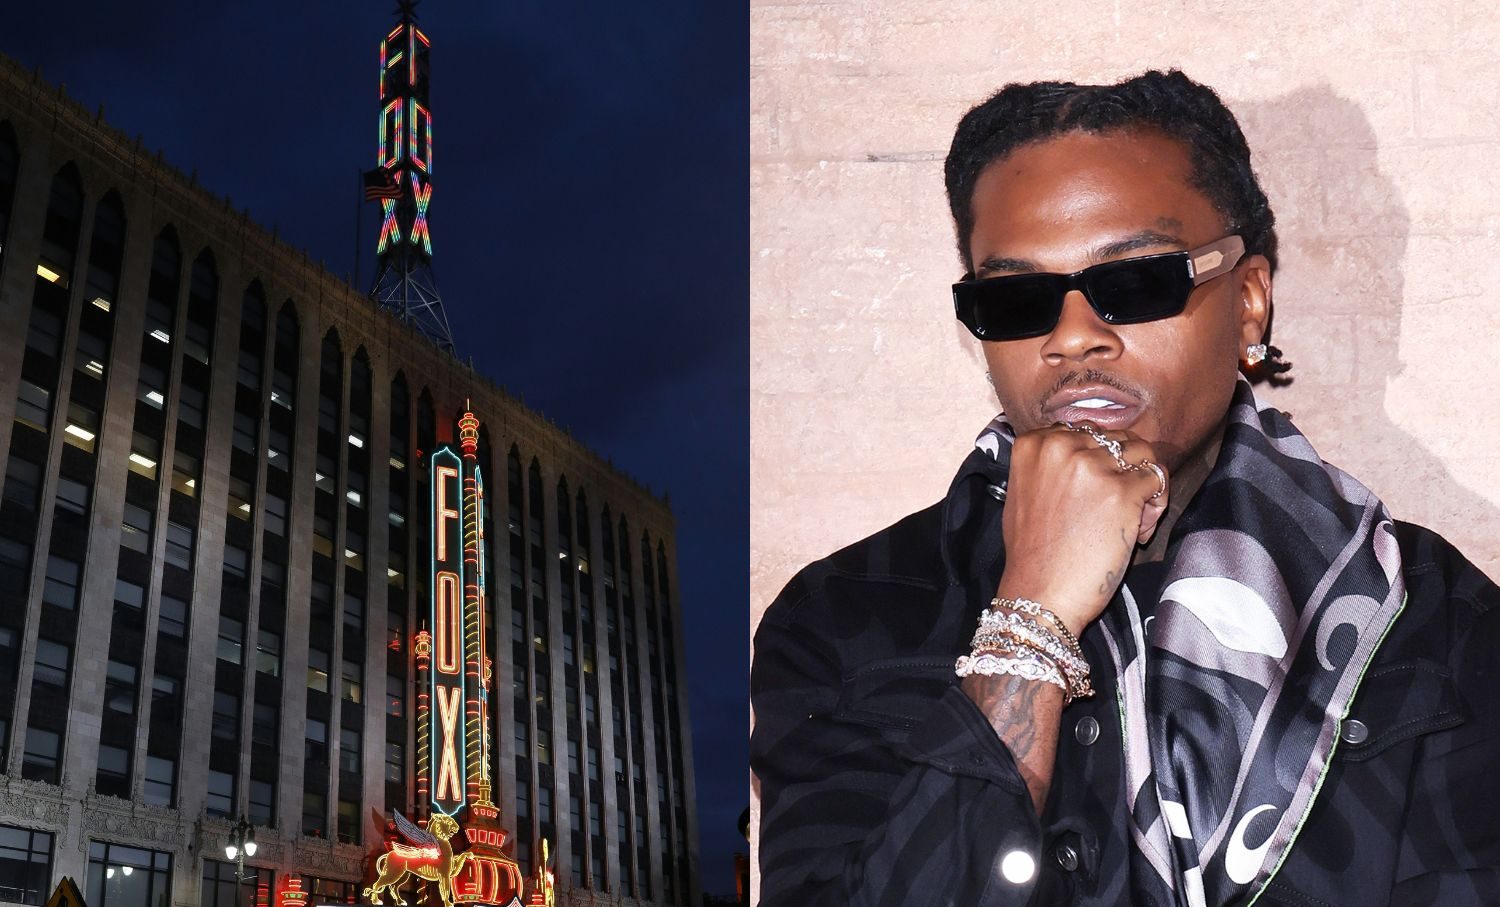 Detroit Venue Reacts After Viral Video Shows Balcony Wobbling During Gunna’s Show (Watch)